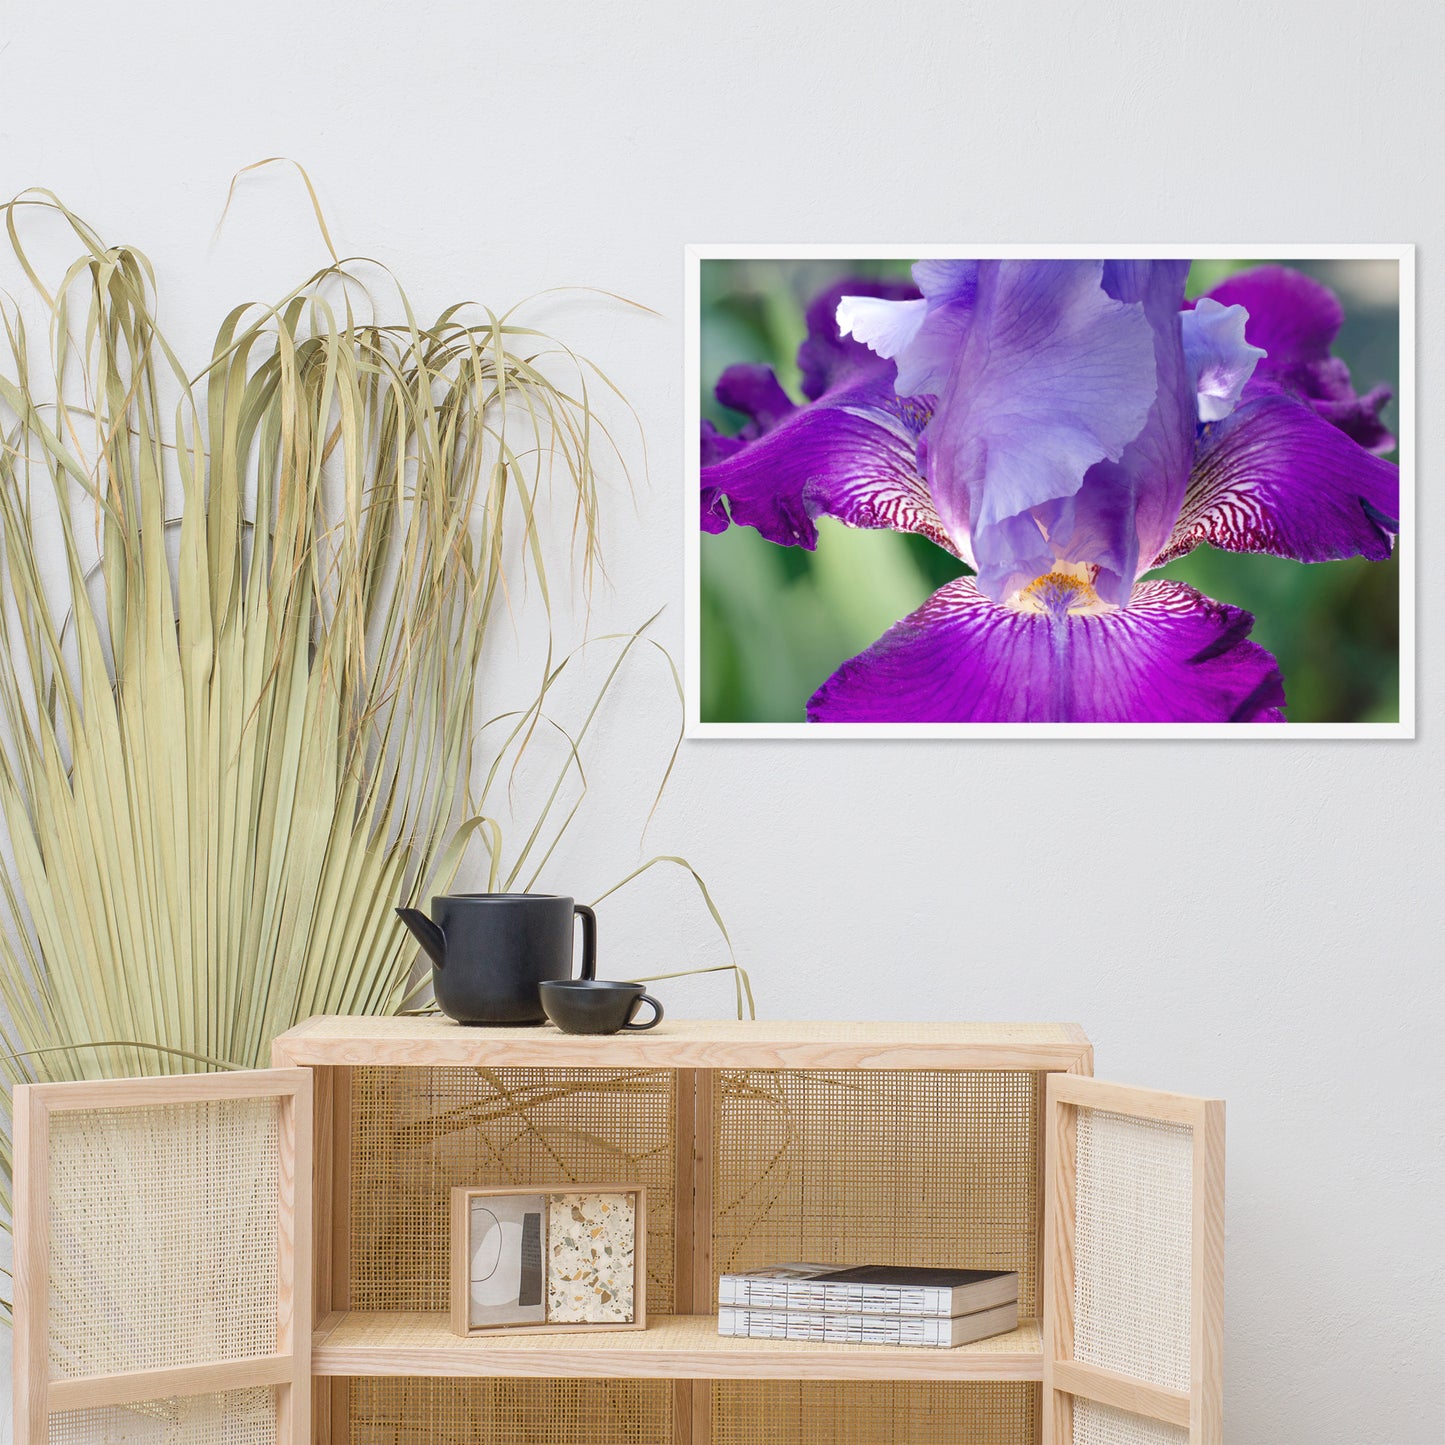 Etsy Pictures For Bedroom: Glowing Iris - Floral / Botanical / Nature Photo Framed Wall Art Print - Artwork - Wall Decor - Modern Home Decor